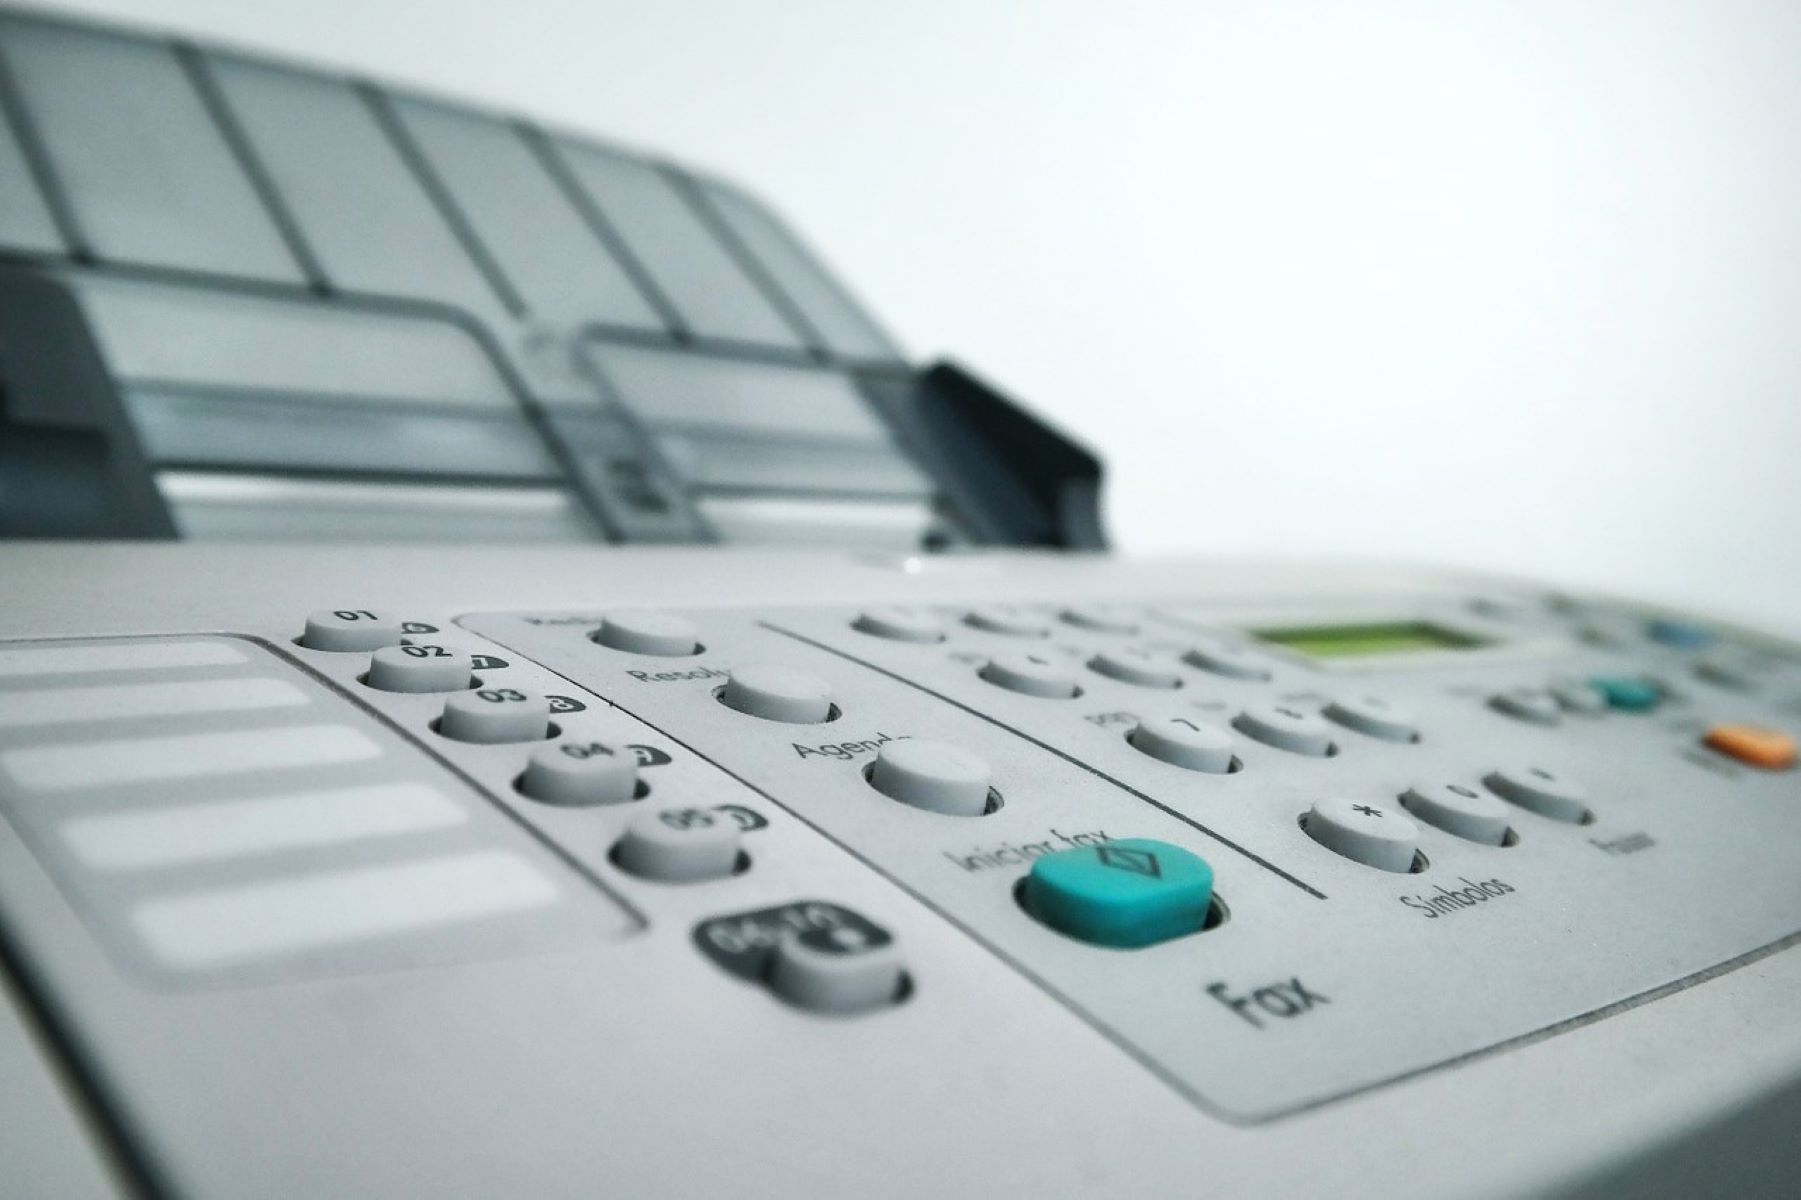 How To Receive Fax On HP Printer Without A Phone Line